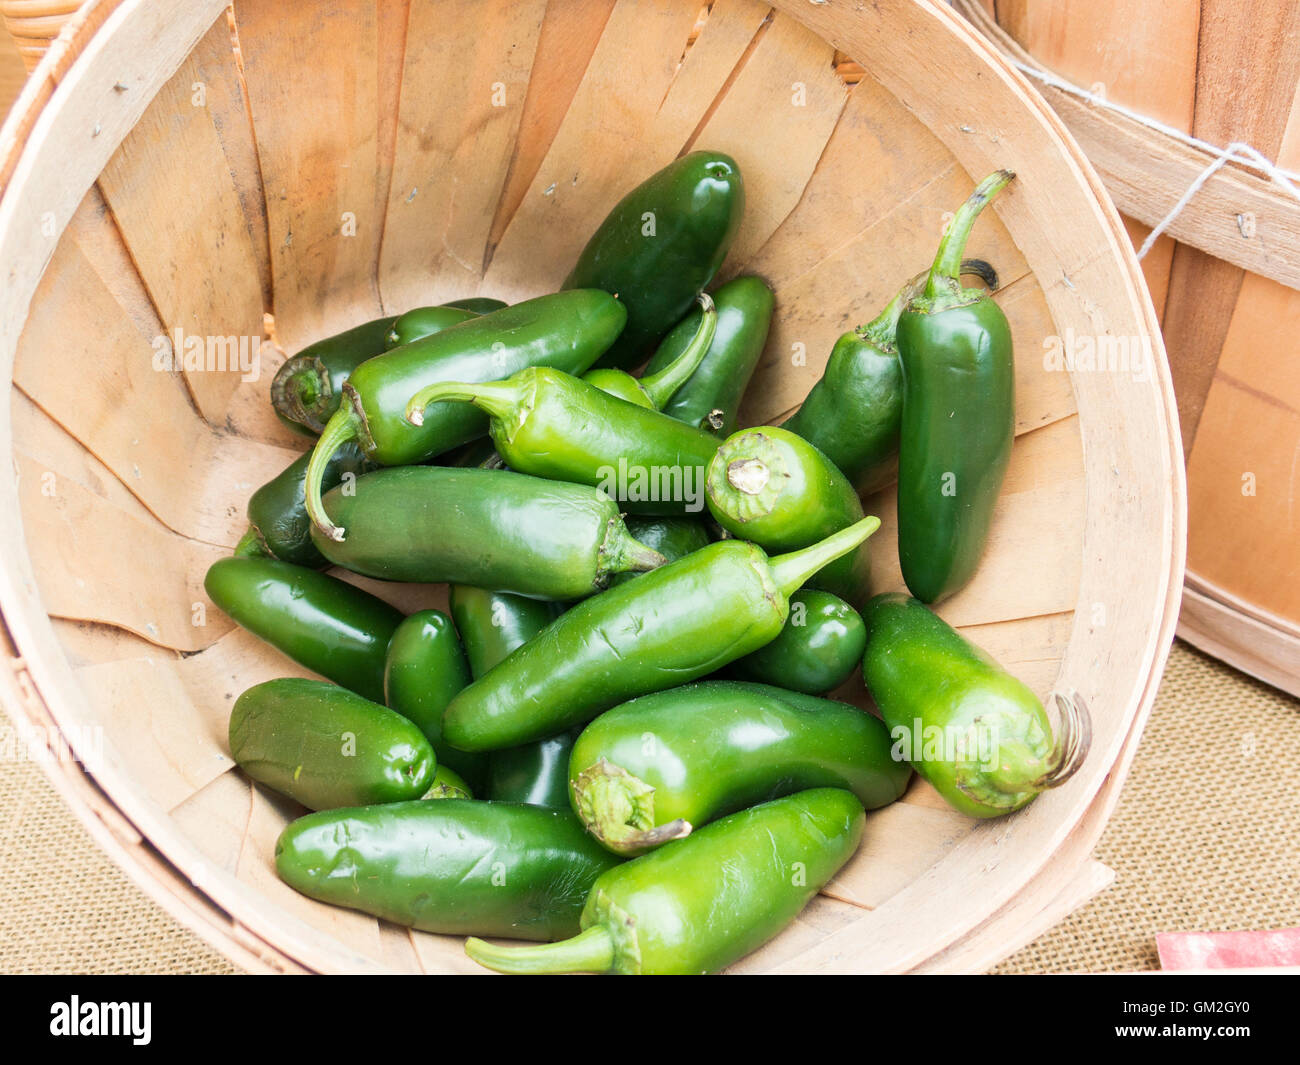 Jalapeno chili peppers in  basket Stock Photo